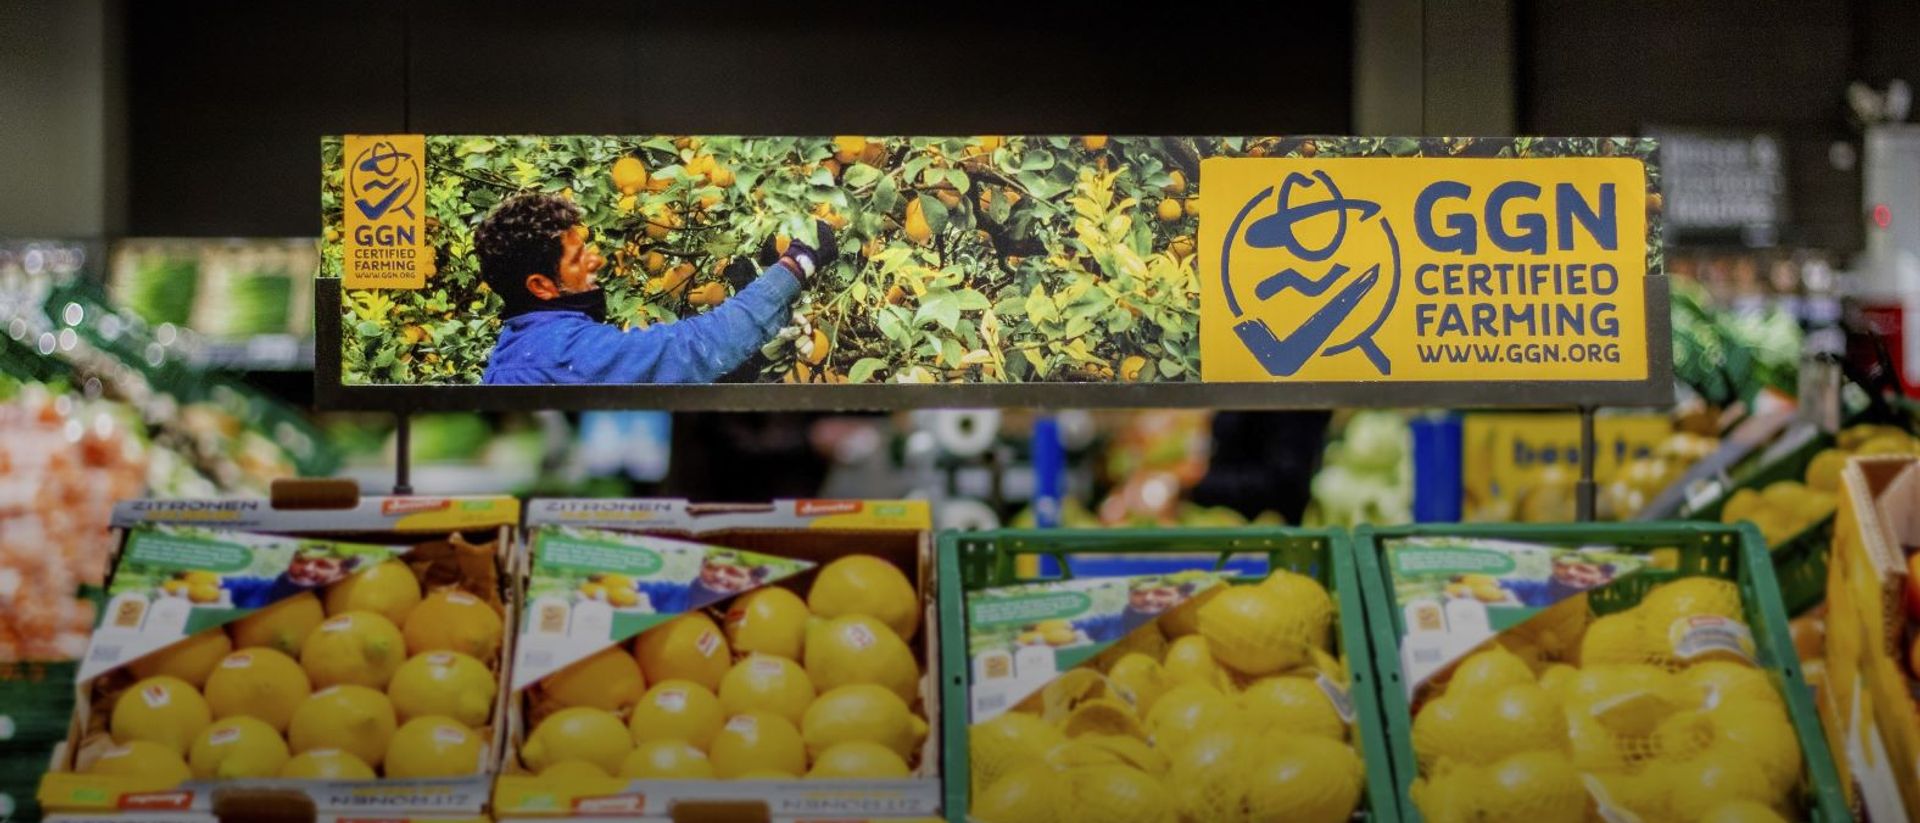 Image of fruit with the GGN label on a display stand in the retailer Globus in Germany